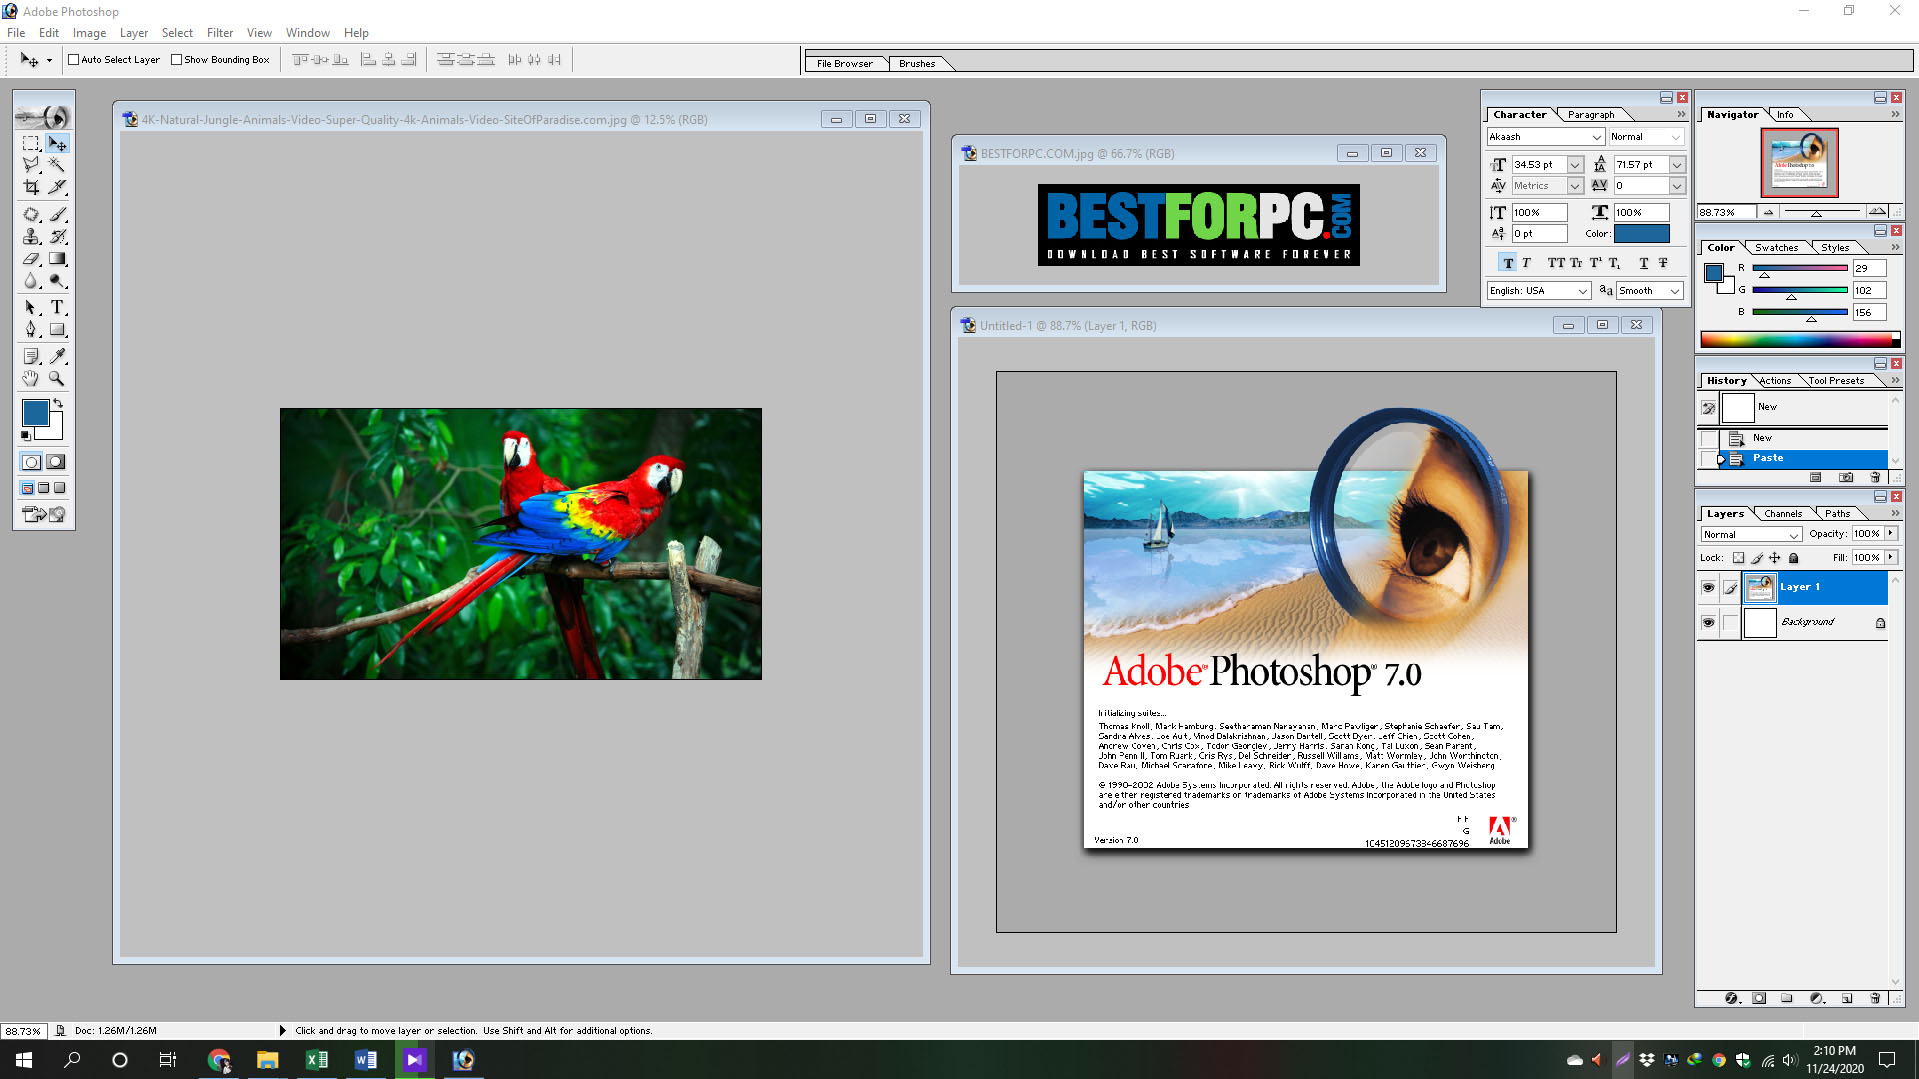 Adobe photoshop full version free download for windows 8 download zoom client for pc